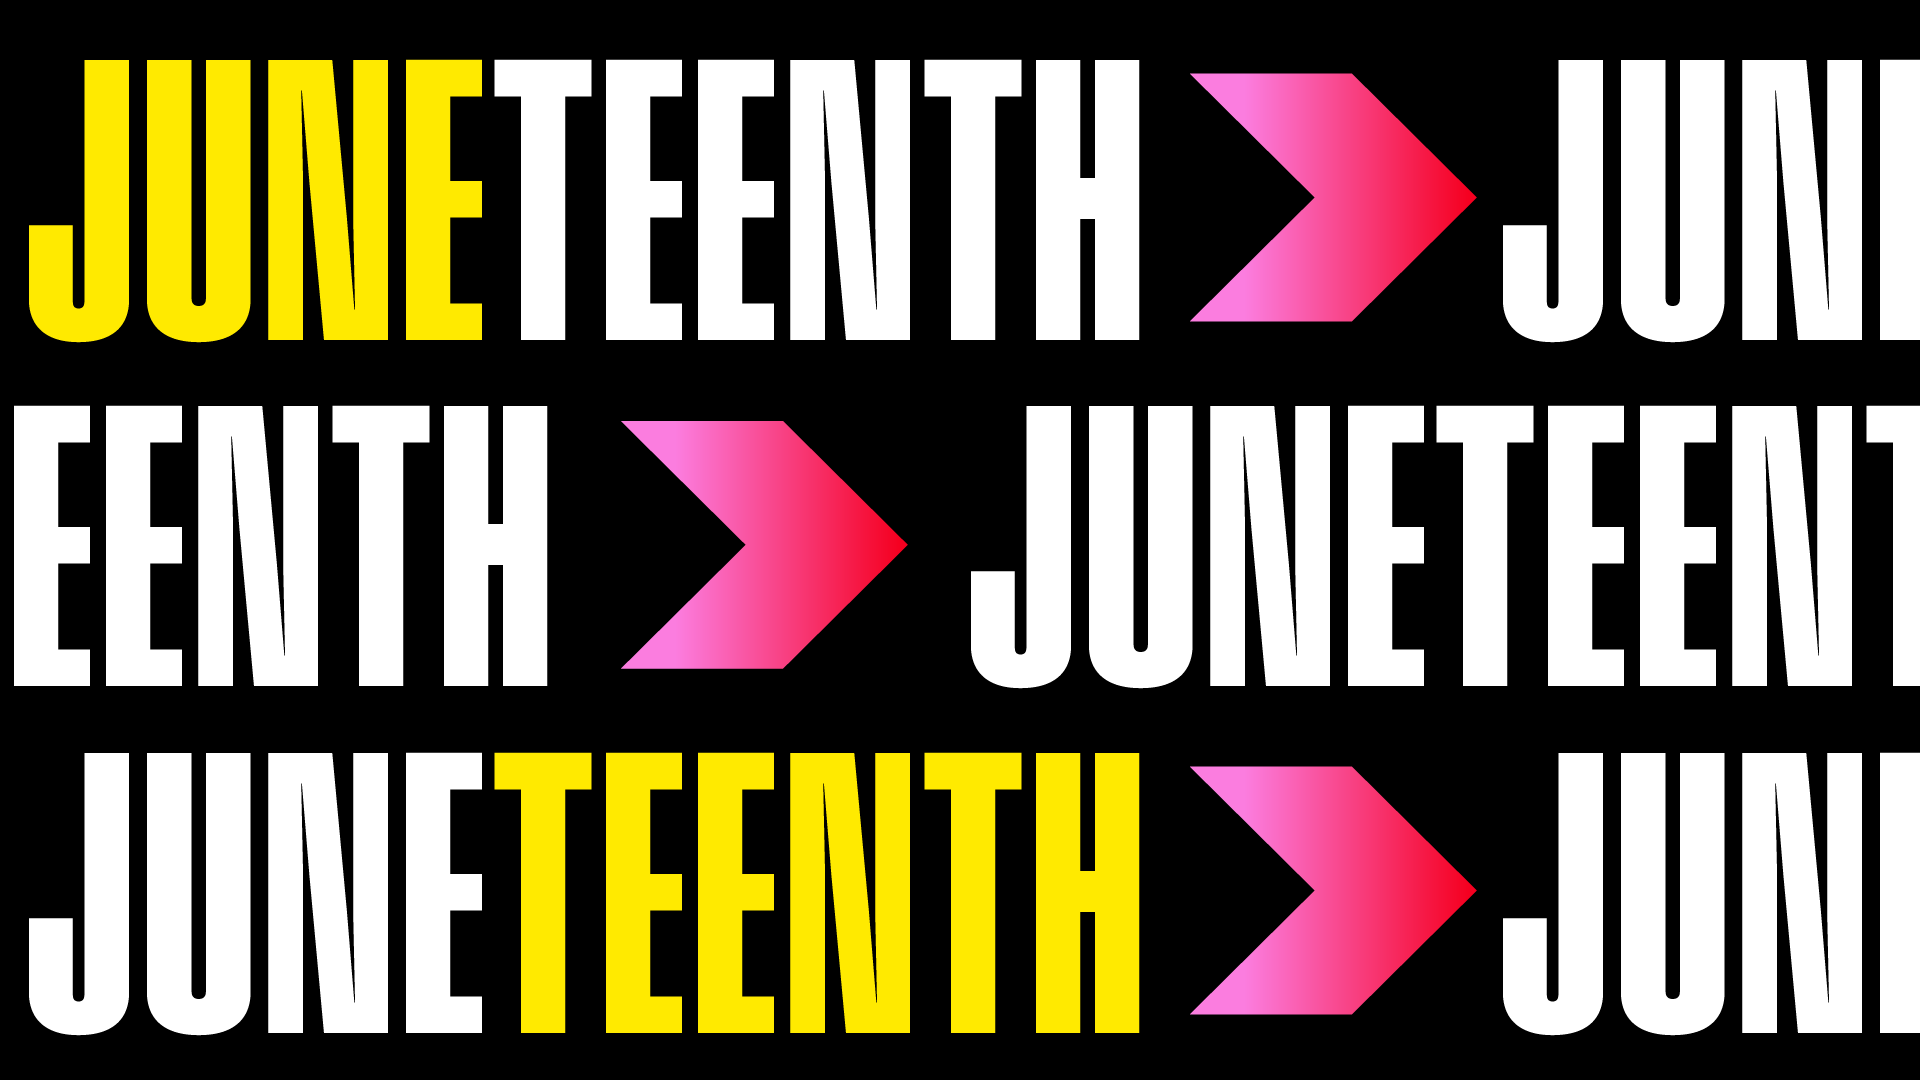 Juneteenth: A Day of Freedom and Celebration